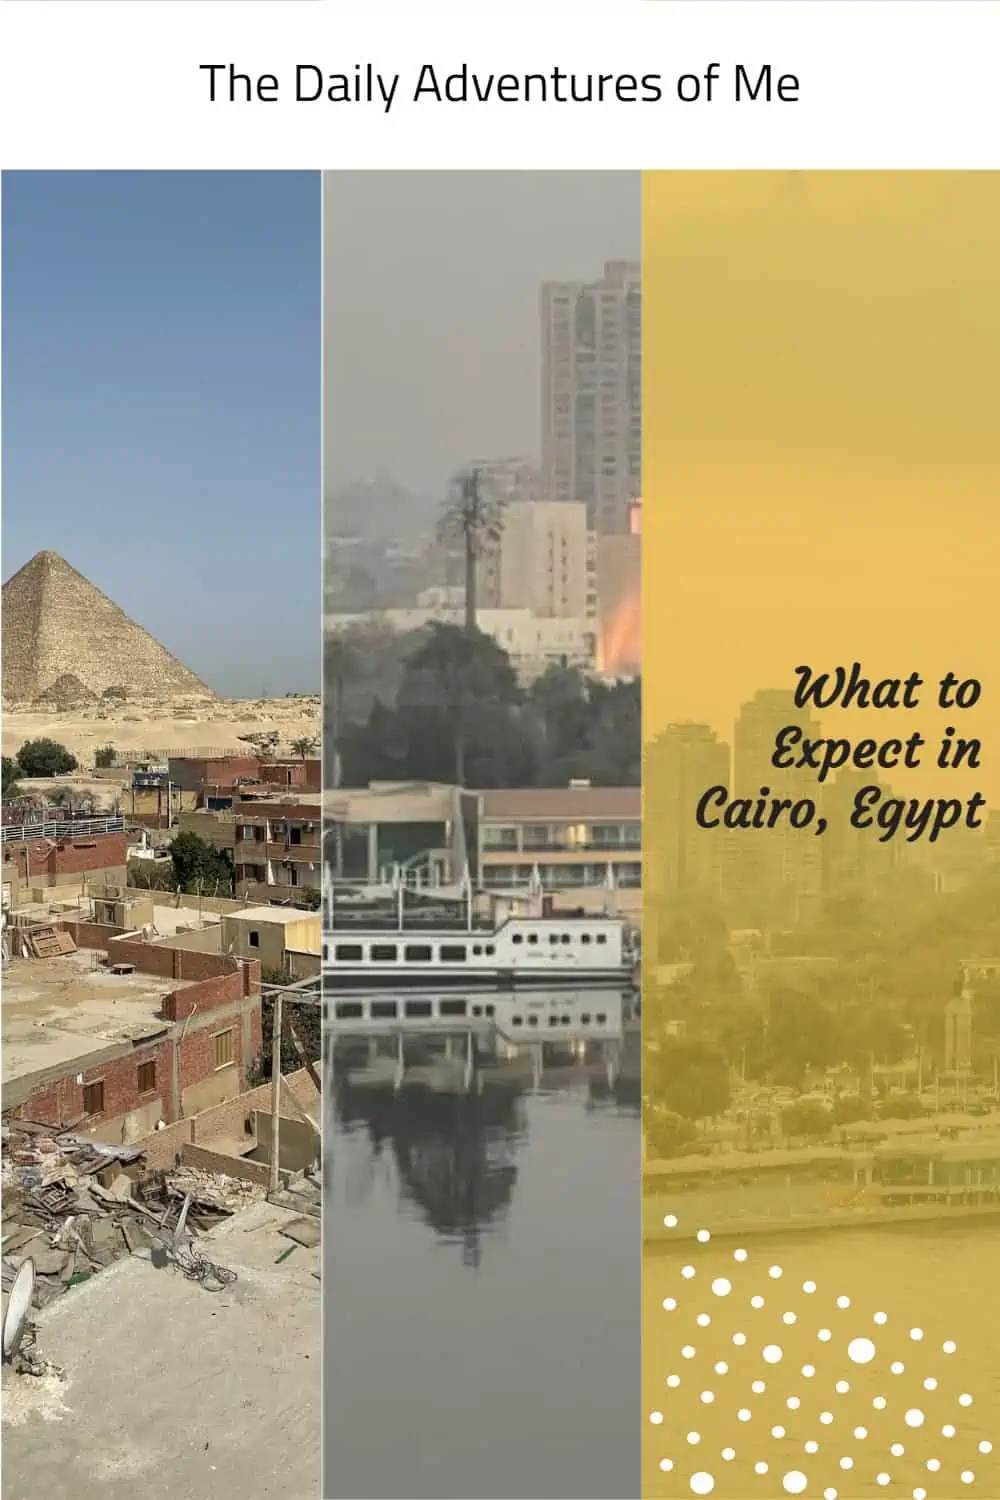 Read on to learn about what to expect from a trip to Cairo, Egypt. #Egpyttravel #traveltoEgypt